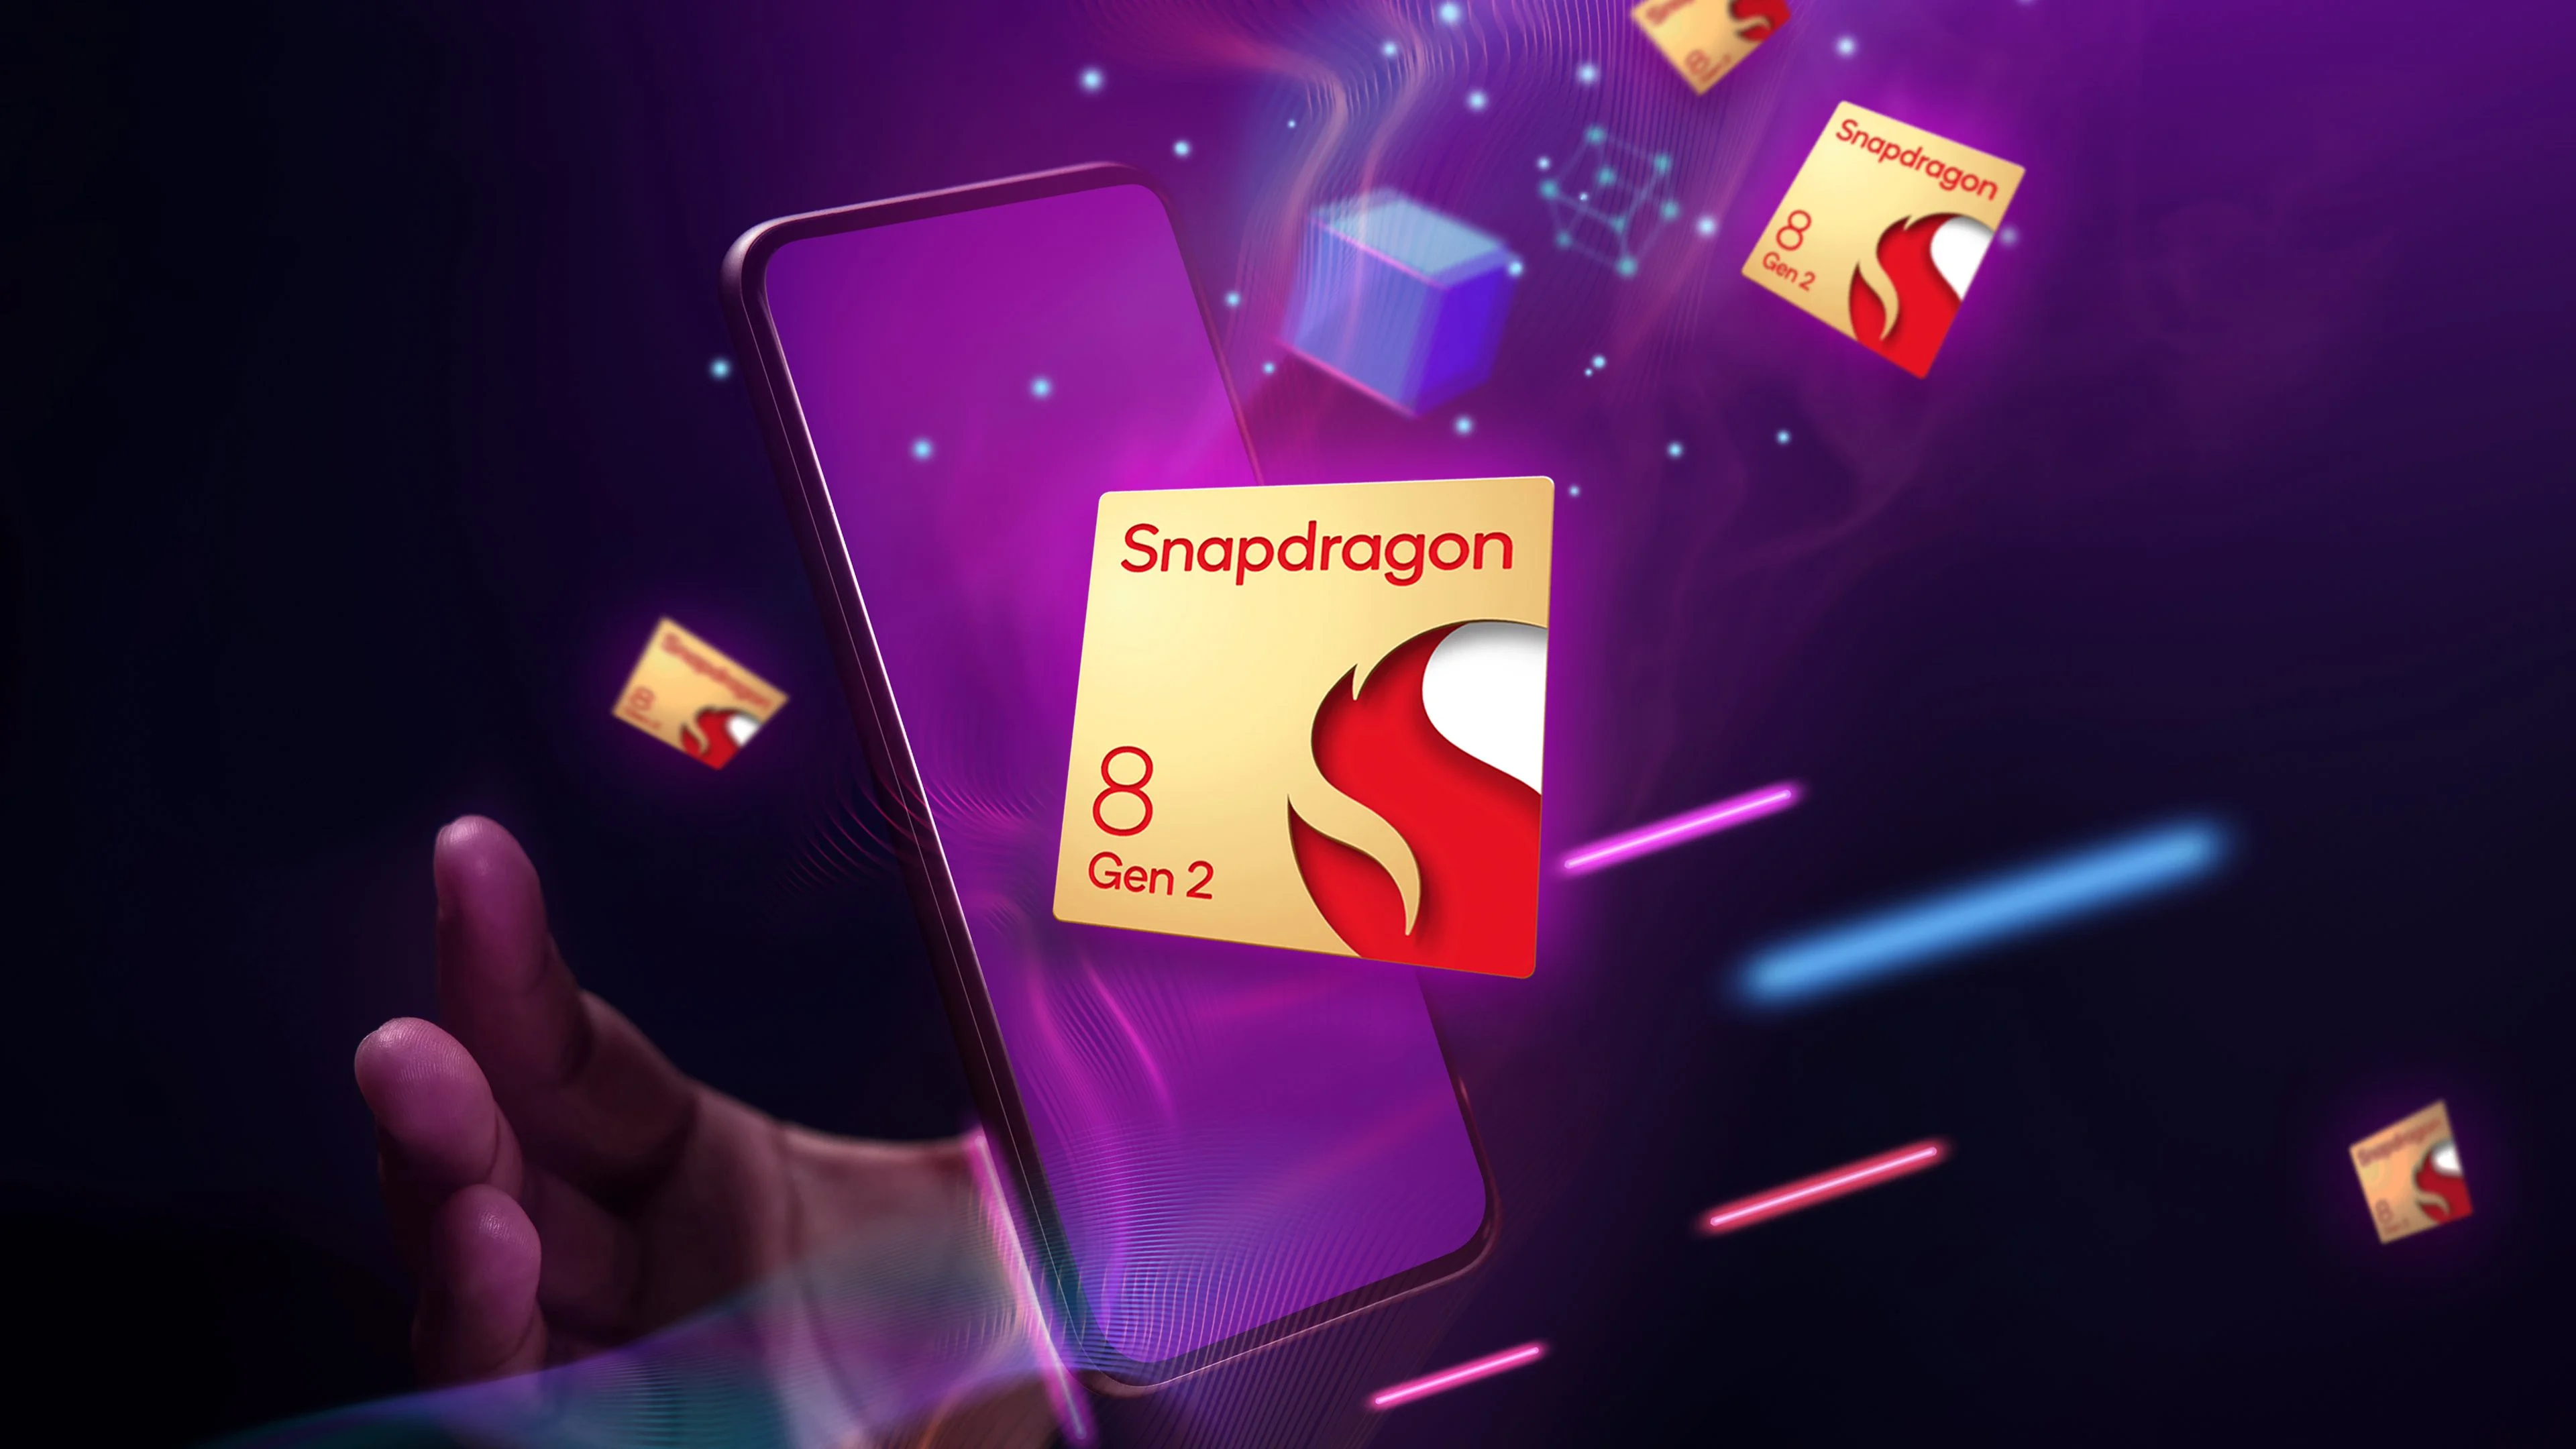 The presentation of the Snapdragon 8 Gen 2 mobile chip took place